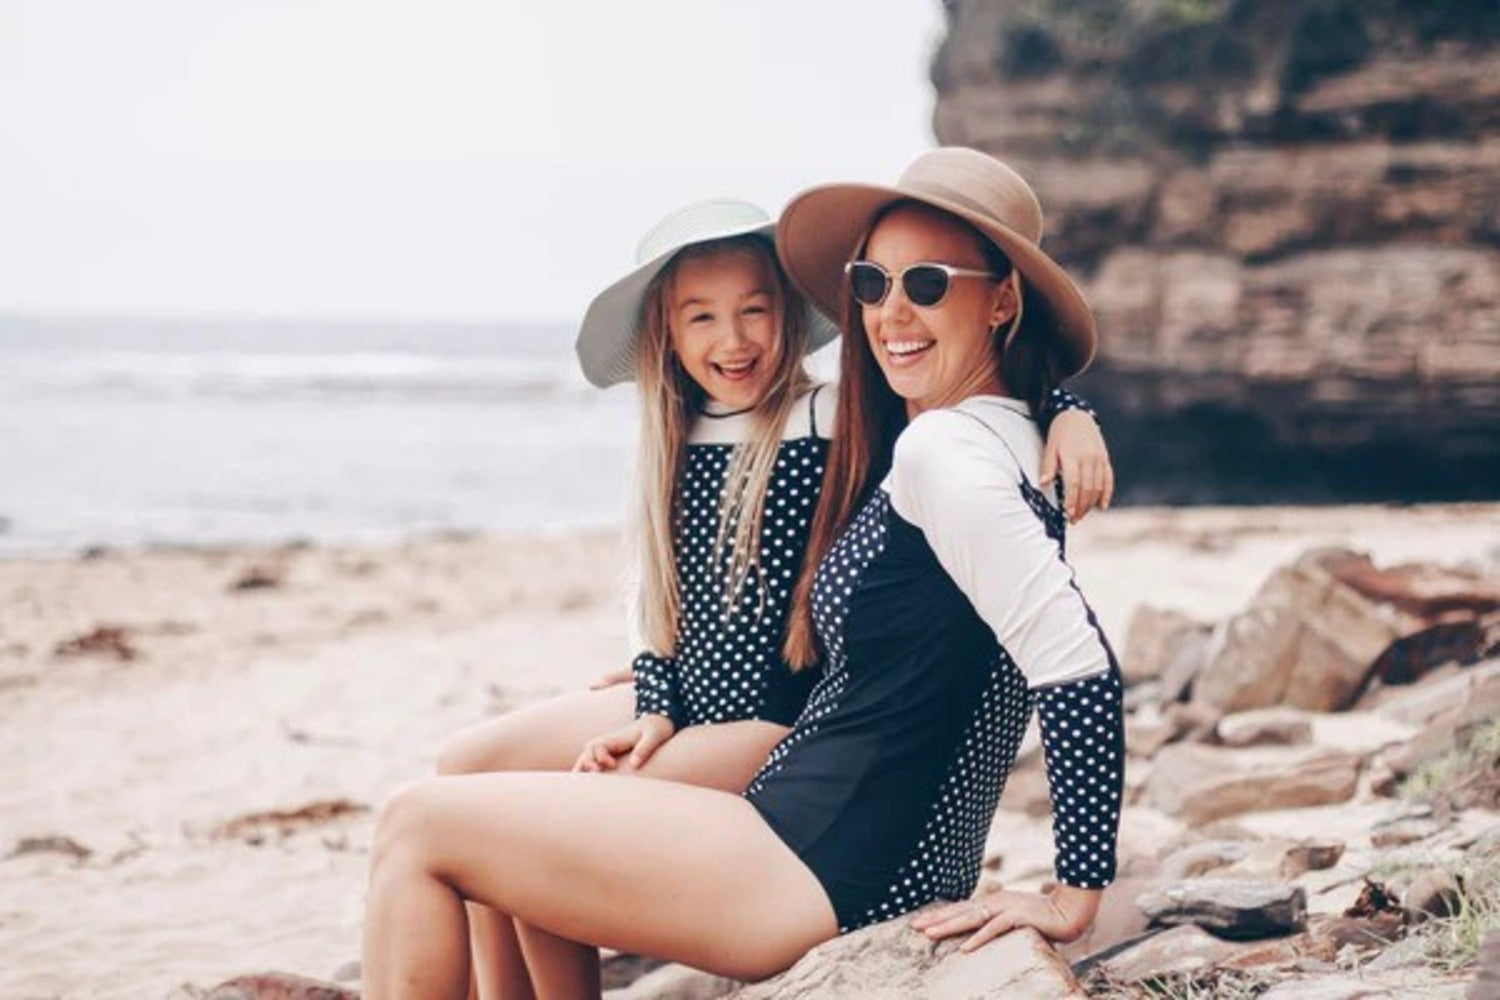 Mother and daughter at beach in mommy and me matching swimsuits—How to shrink a swimsuit.